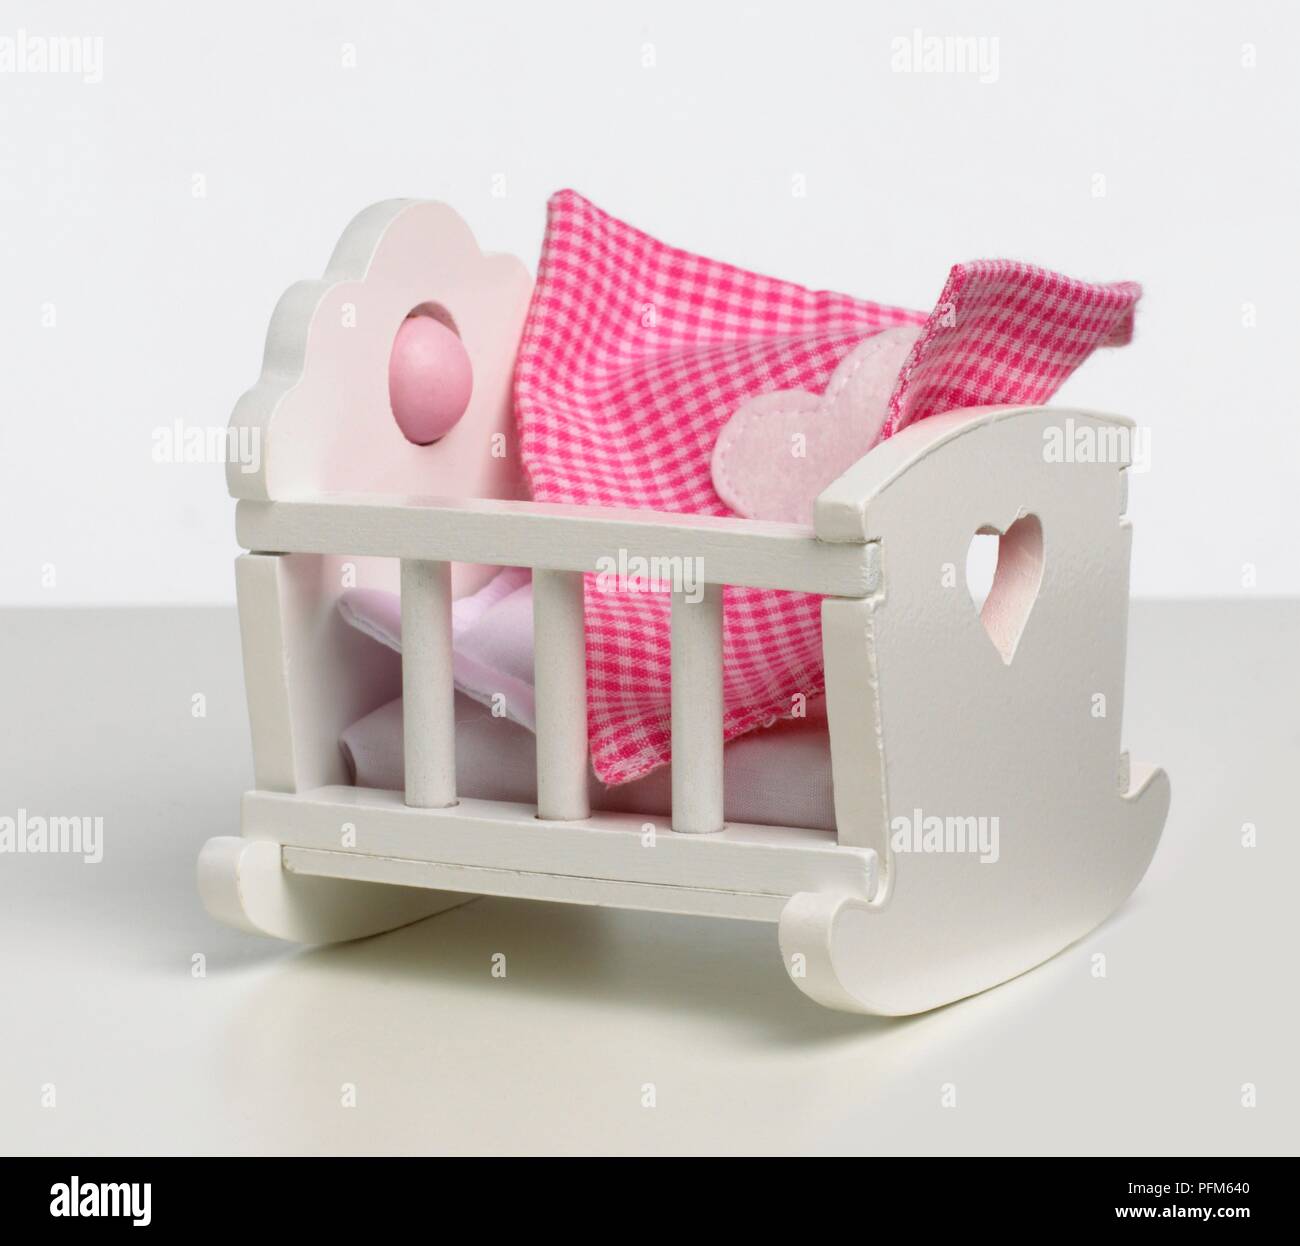 White, wooden toy cot with red gingham blanket Stock Photo